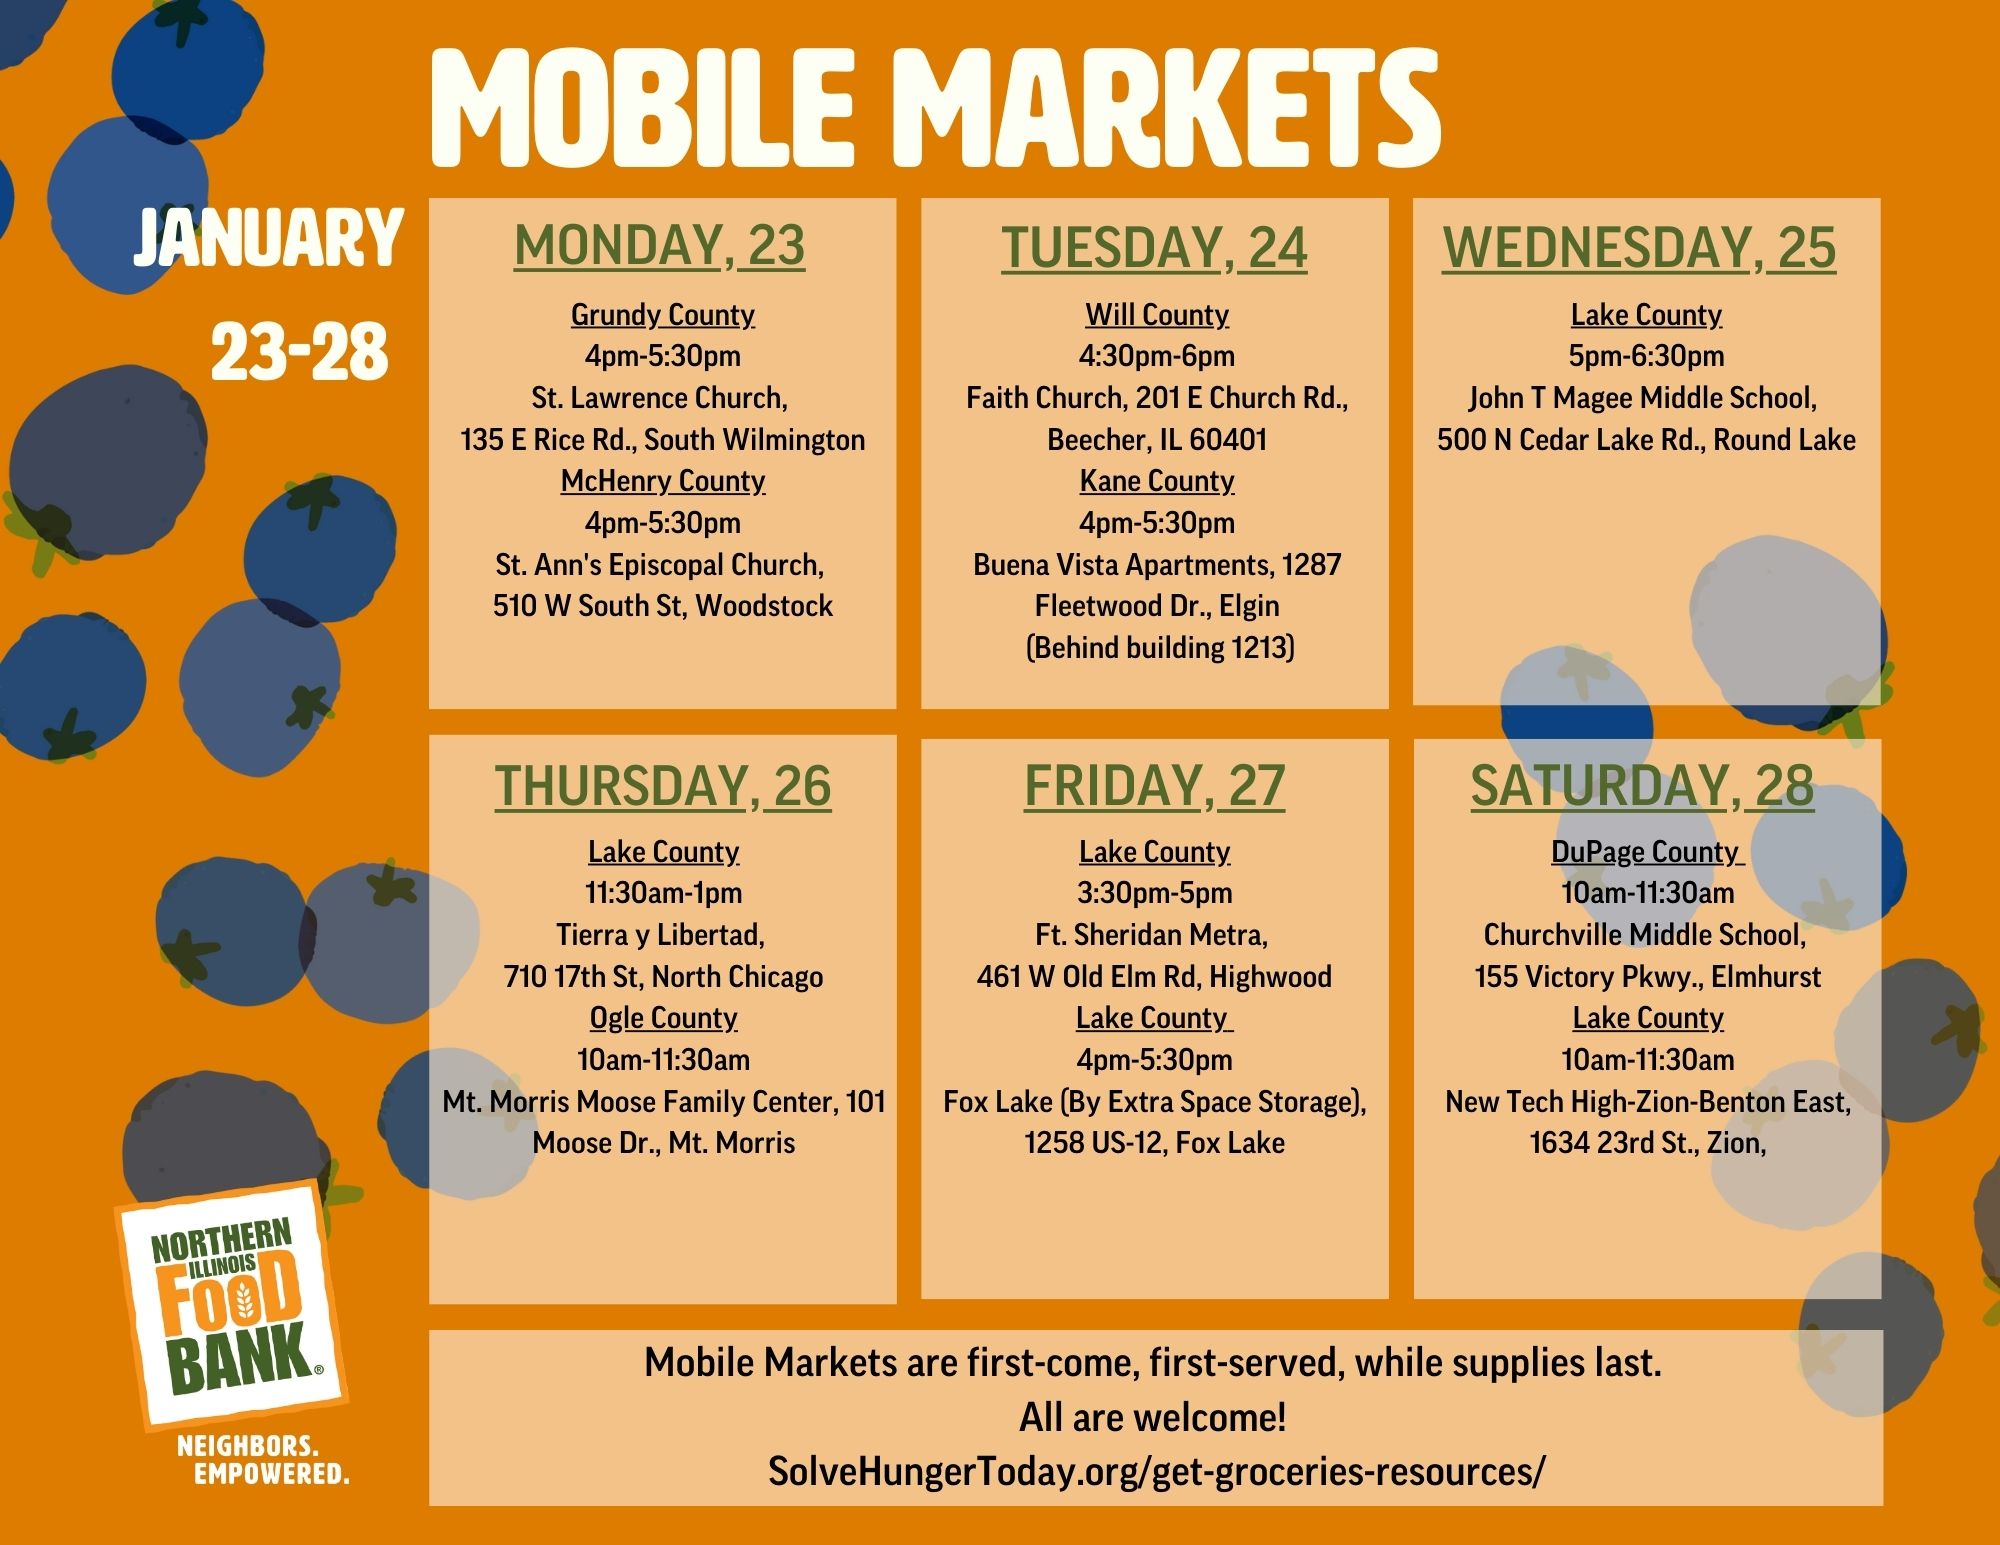 Calendar showing the dates and locations of the Northern Illinois Food Bank Mobile Markets